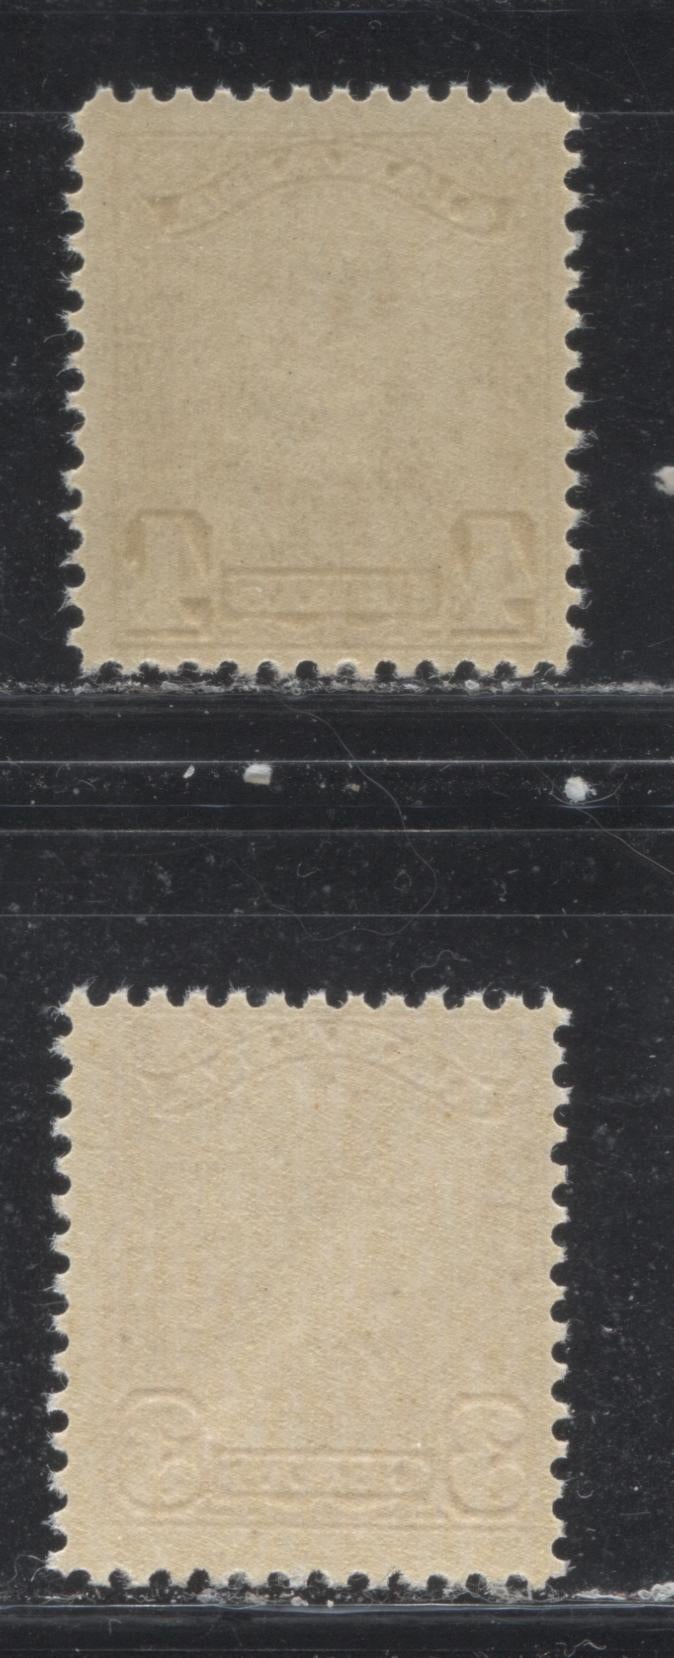 Lot 238 Canada # 151-152 3c & 4c Olive Bistre & Carmine Red King George V, 1928-1929 Scroll Issue, Two Fine NH Examples